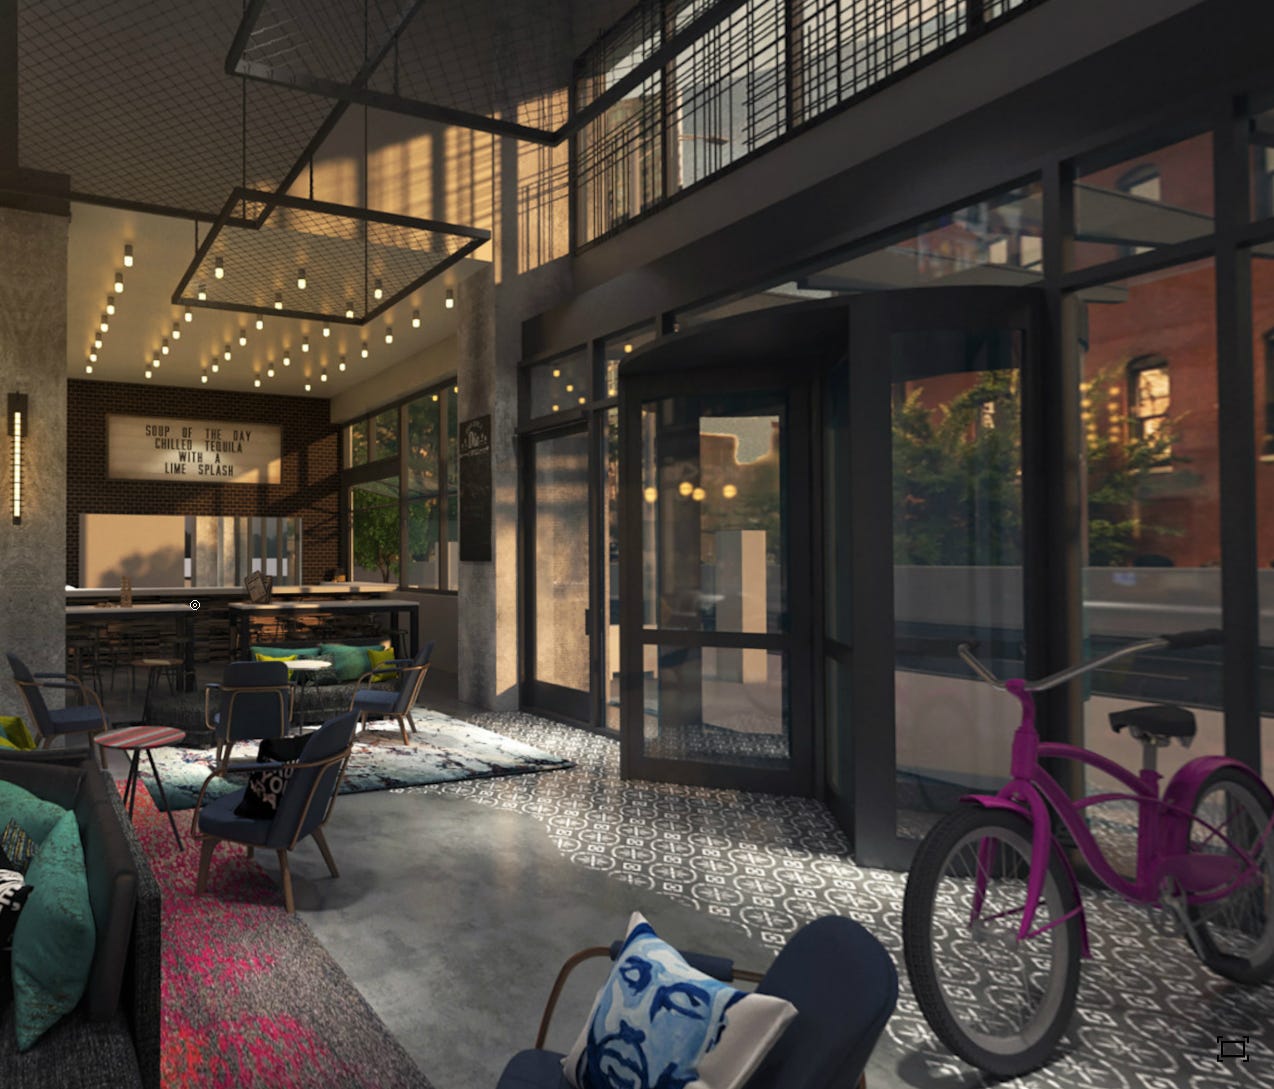 Moxy Chicago is the first of its brand in the Midwest.